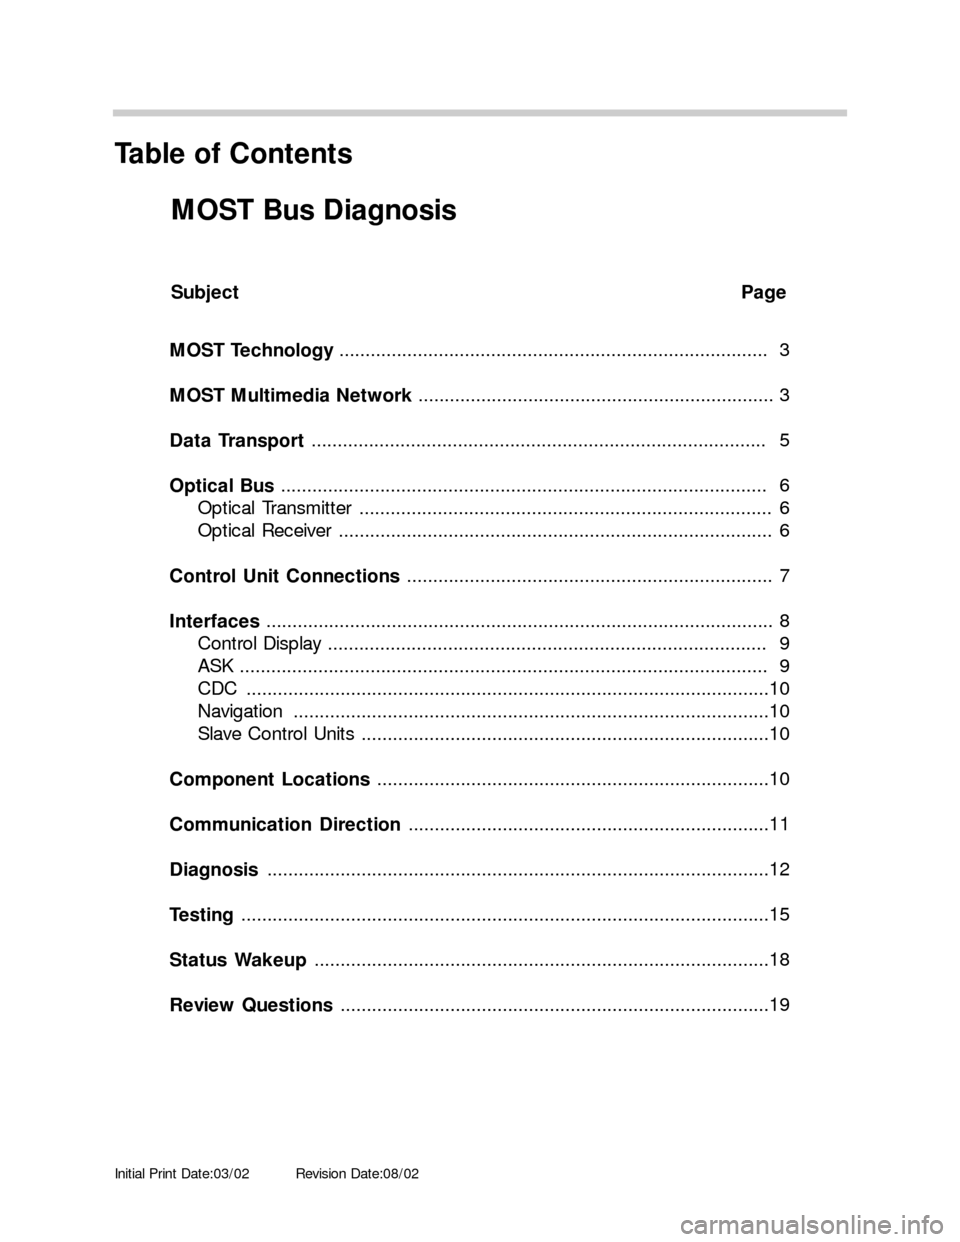 BMW 7 SERIES 2005 E65 MOST Bus Diagnosis Workshop Manual Initial Print Date:03/02Revision Date:08/02
Subject Page
MOST Technology ..................................................................................  3
MOST Multimedia Network .................